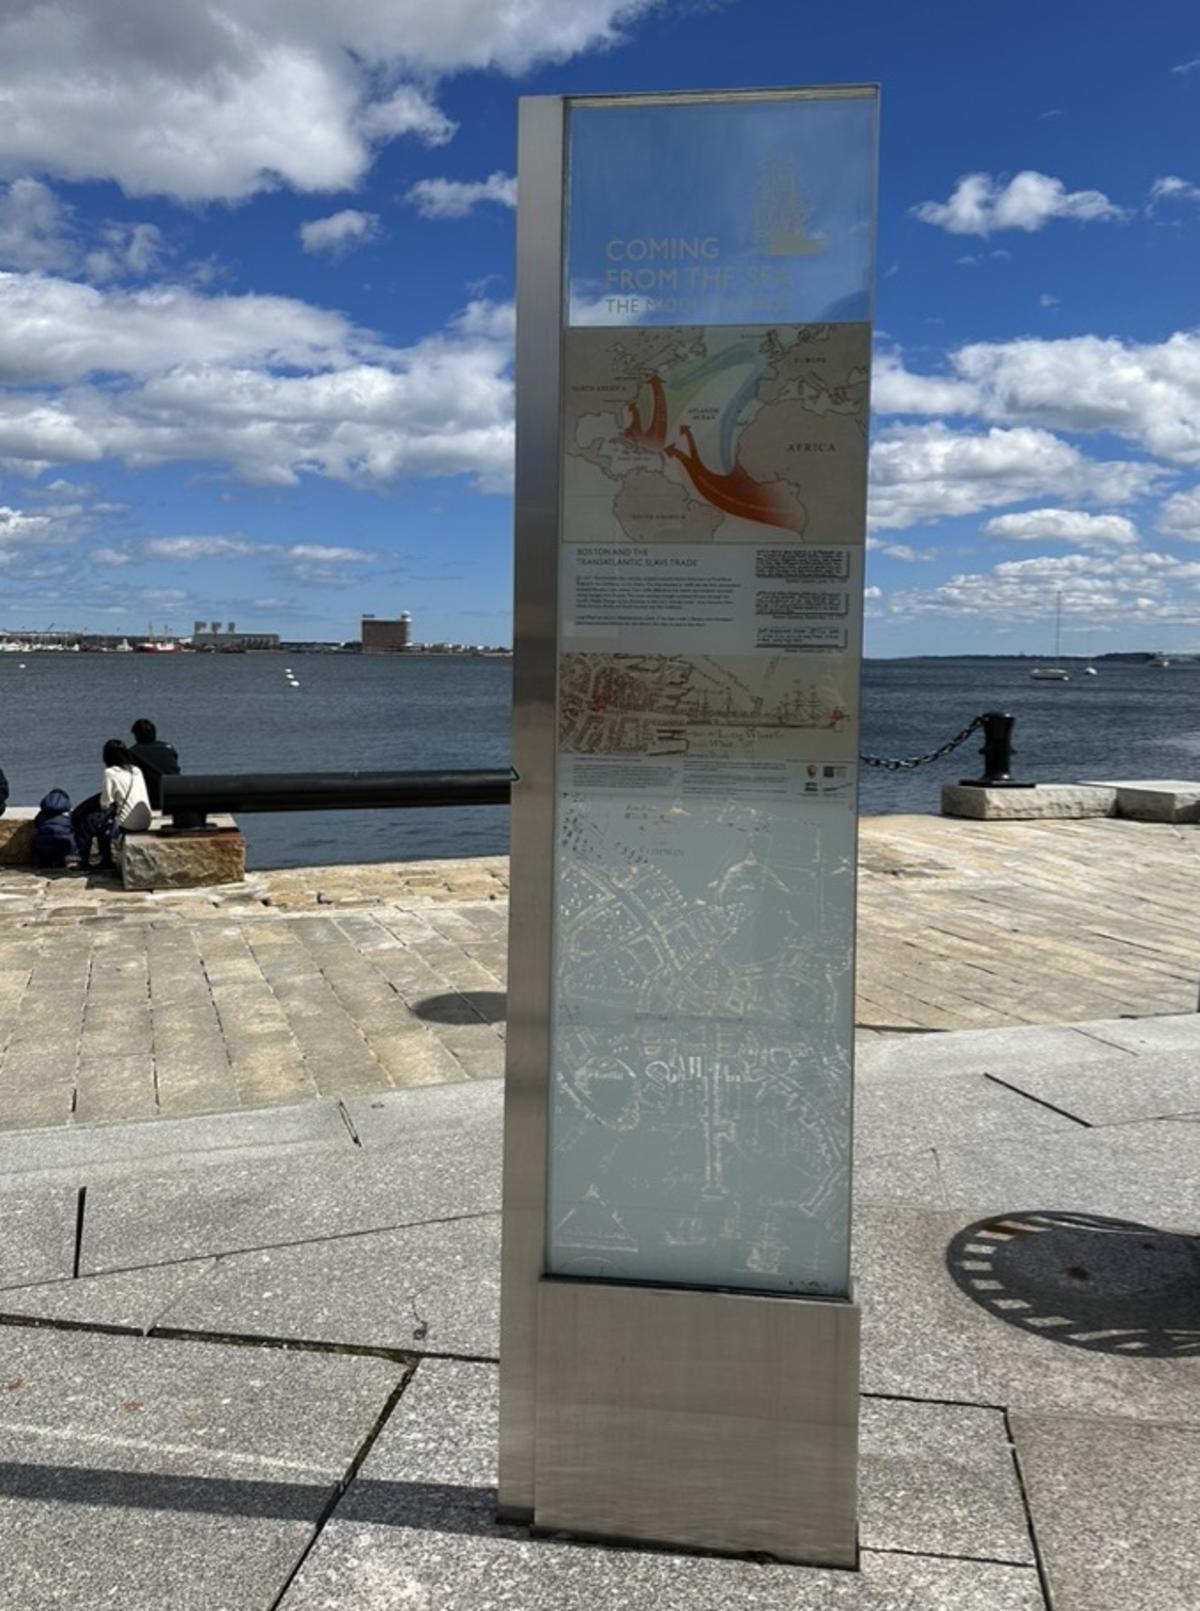 View of the Middle Passage marker overlooking Boston Harbor